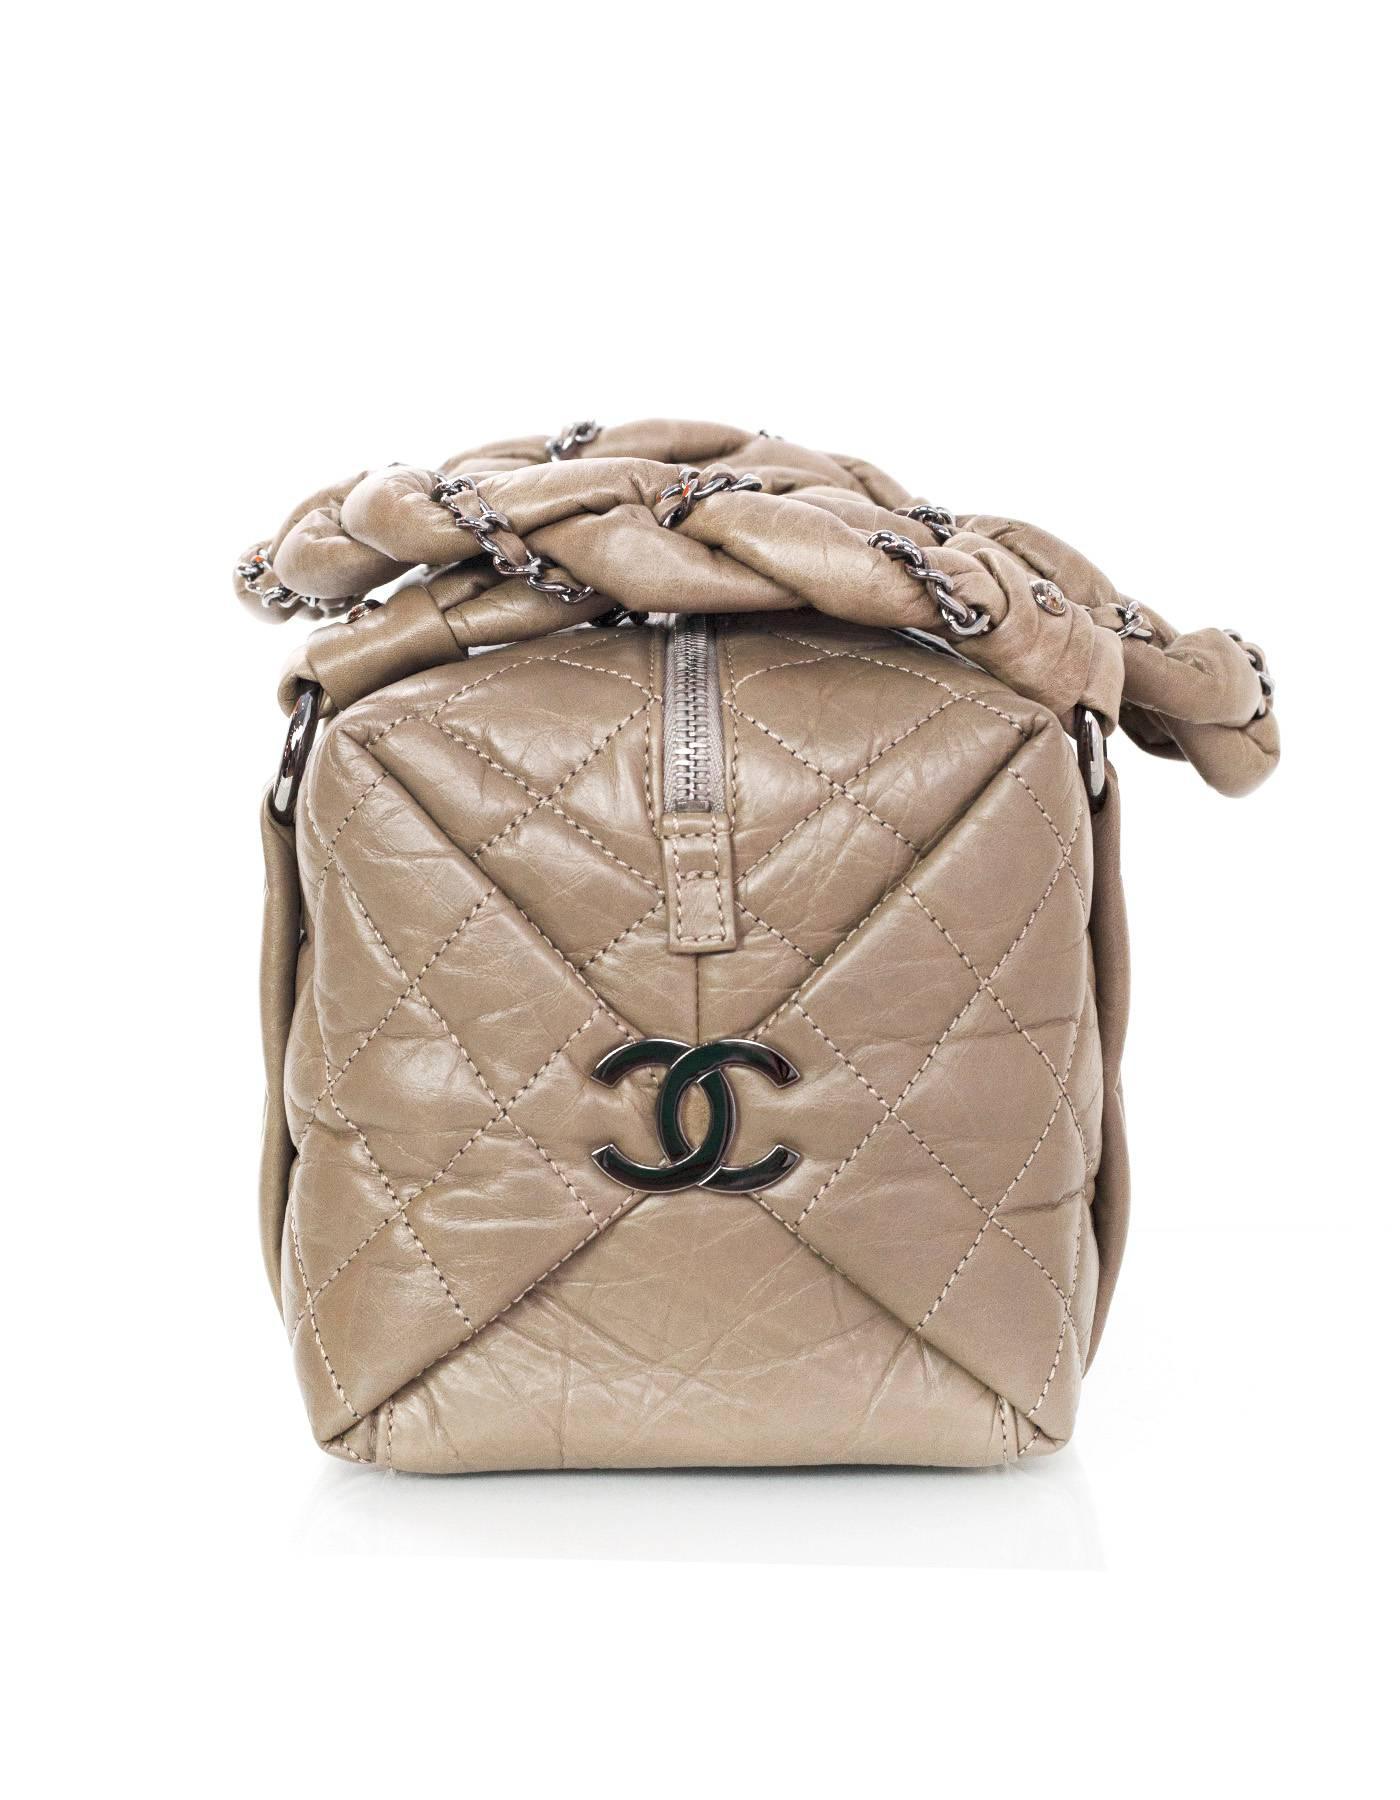 Chanel Etoupe Quilted Leather Lady Braid Bubble Bag 
Features leather woven chain link details wrapped around shoulder straps and two large CC pendants on both side panels of bag
Made In: Italy
Year of Production: 2006
Color: Taupe
Hardware: